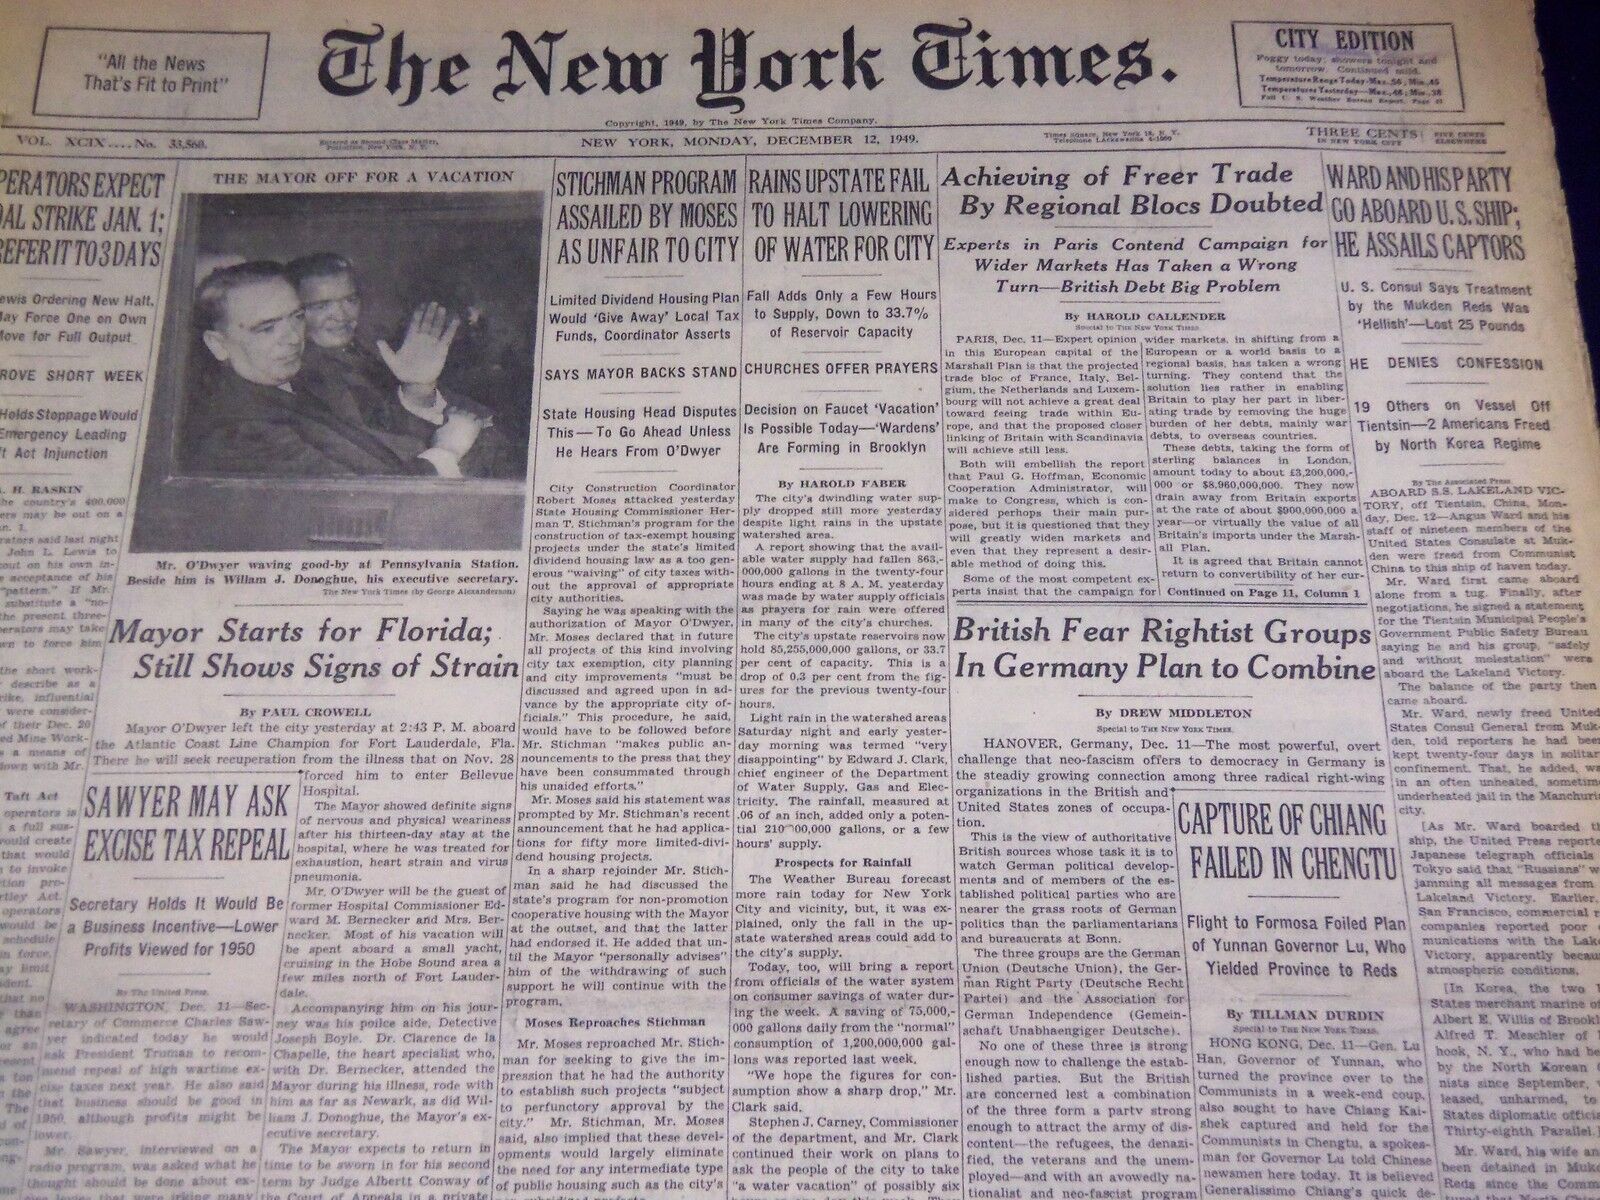 1949 DECEMBER 12 NEW YORK TIMES - CAPTURE OF CHIANG FAILED - NT 3001